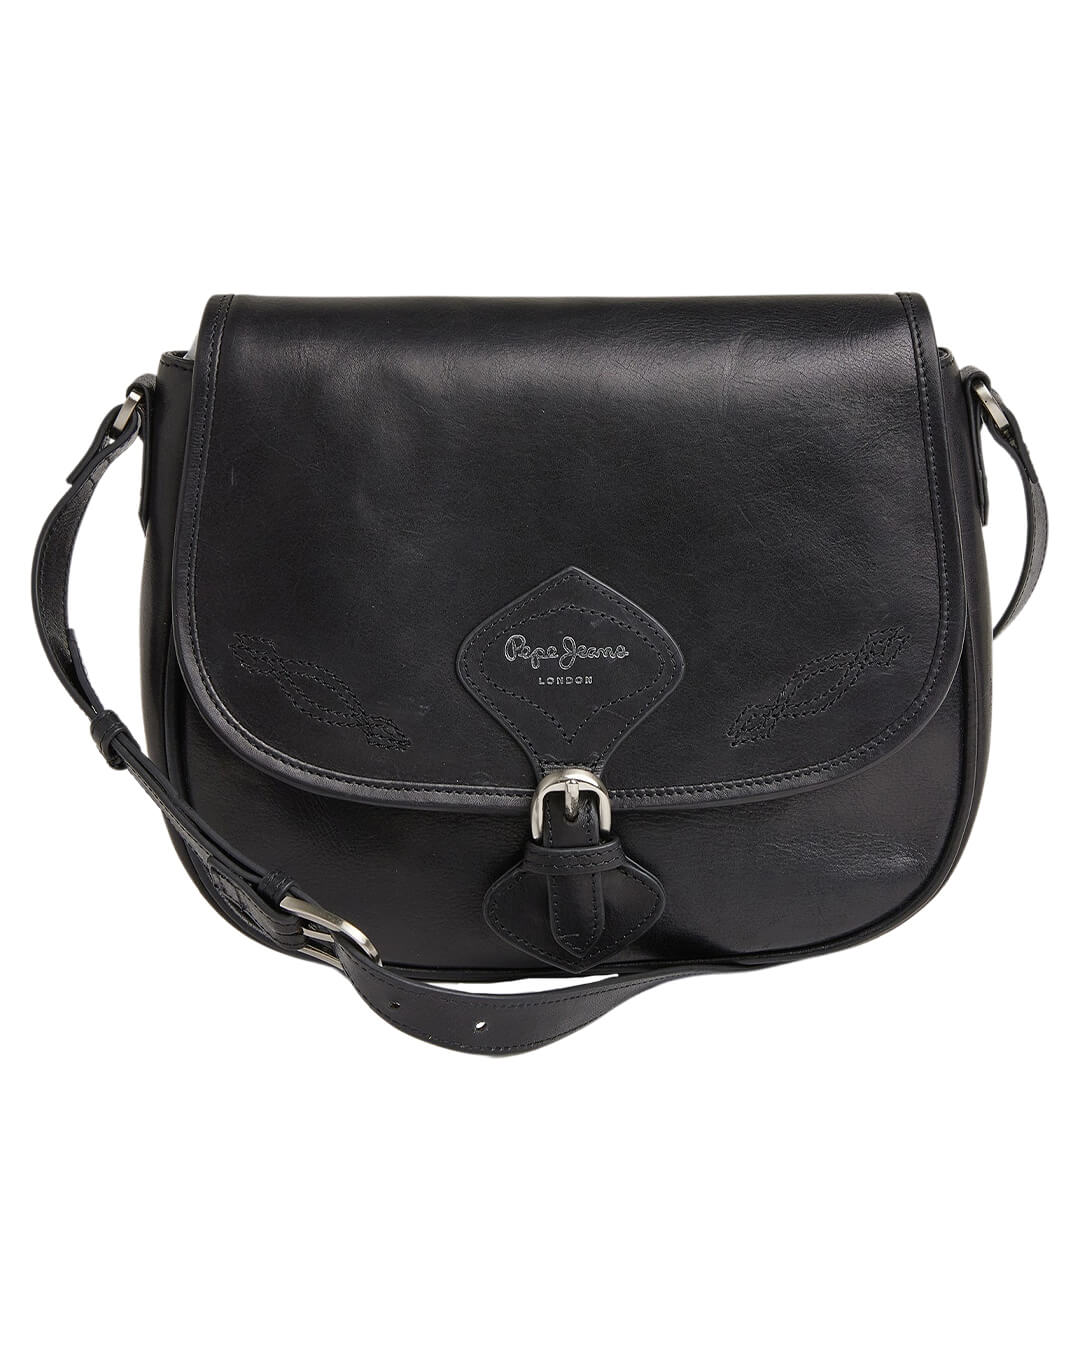 Pepe Jeans Bags ONE Pepe Jeans Andrea Black Bag